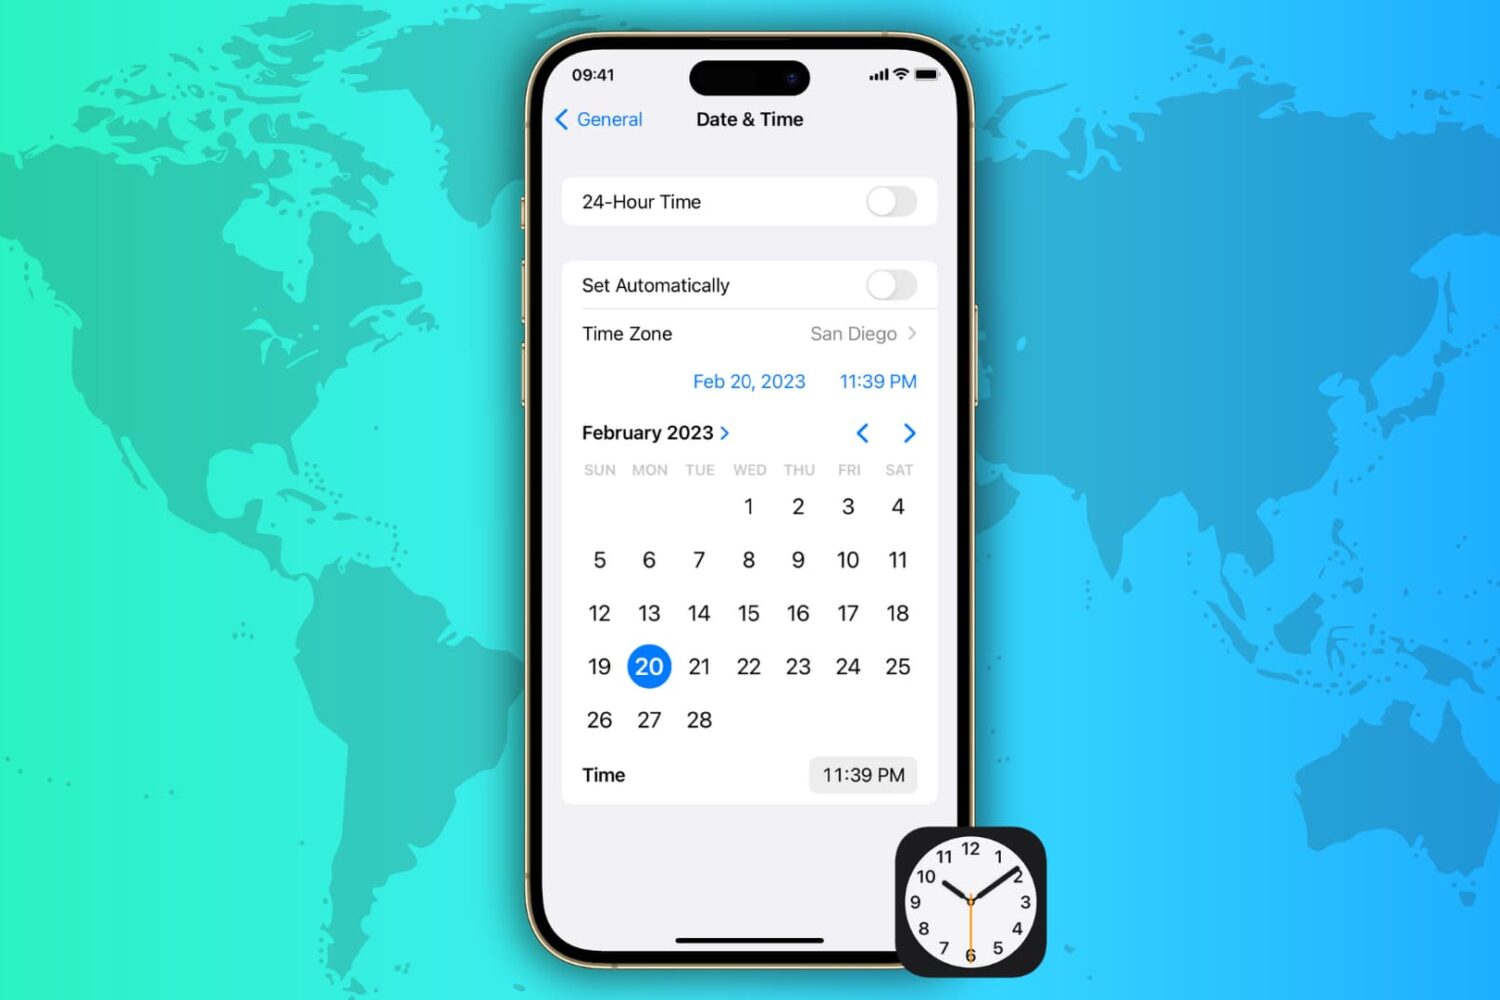 Illustration showing iPhone with date, time, and time zone settings on the screen with a world map in the background